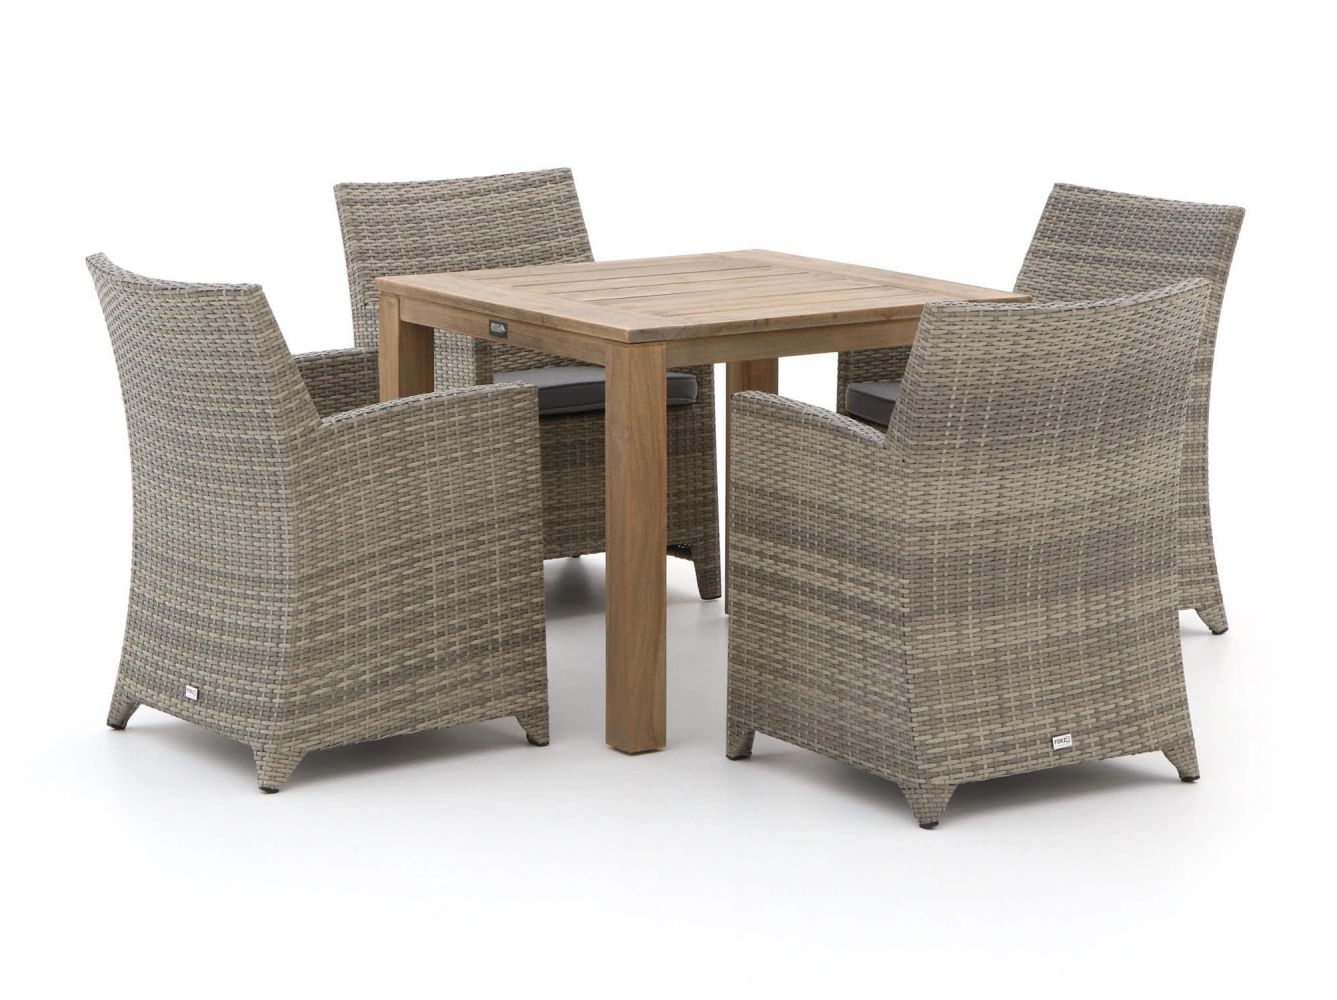 2cdcb8b848f15592e986ea81c9afb041c2981d42 113691 p01 wys8byxouxssicmt - Forza Barolo/ROUGH-S 90cm dining tuinset 5-delig